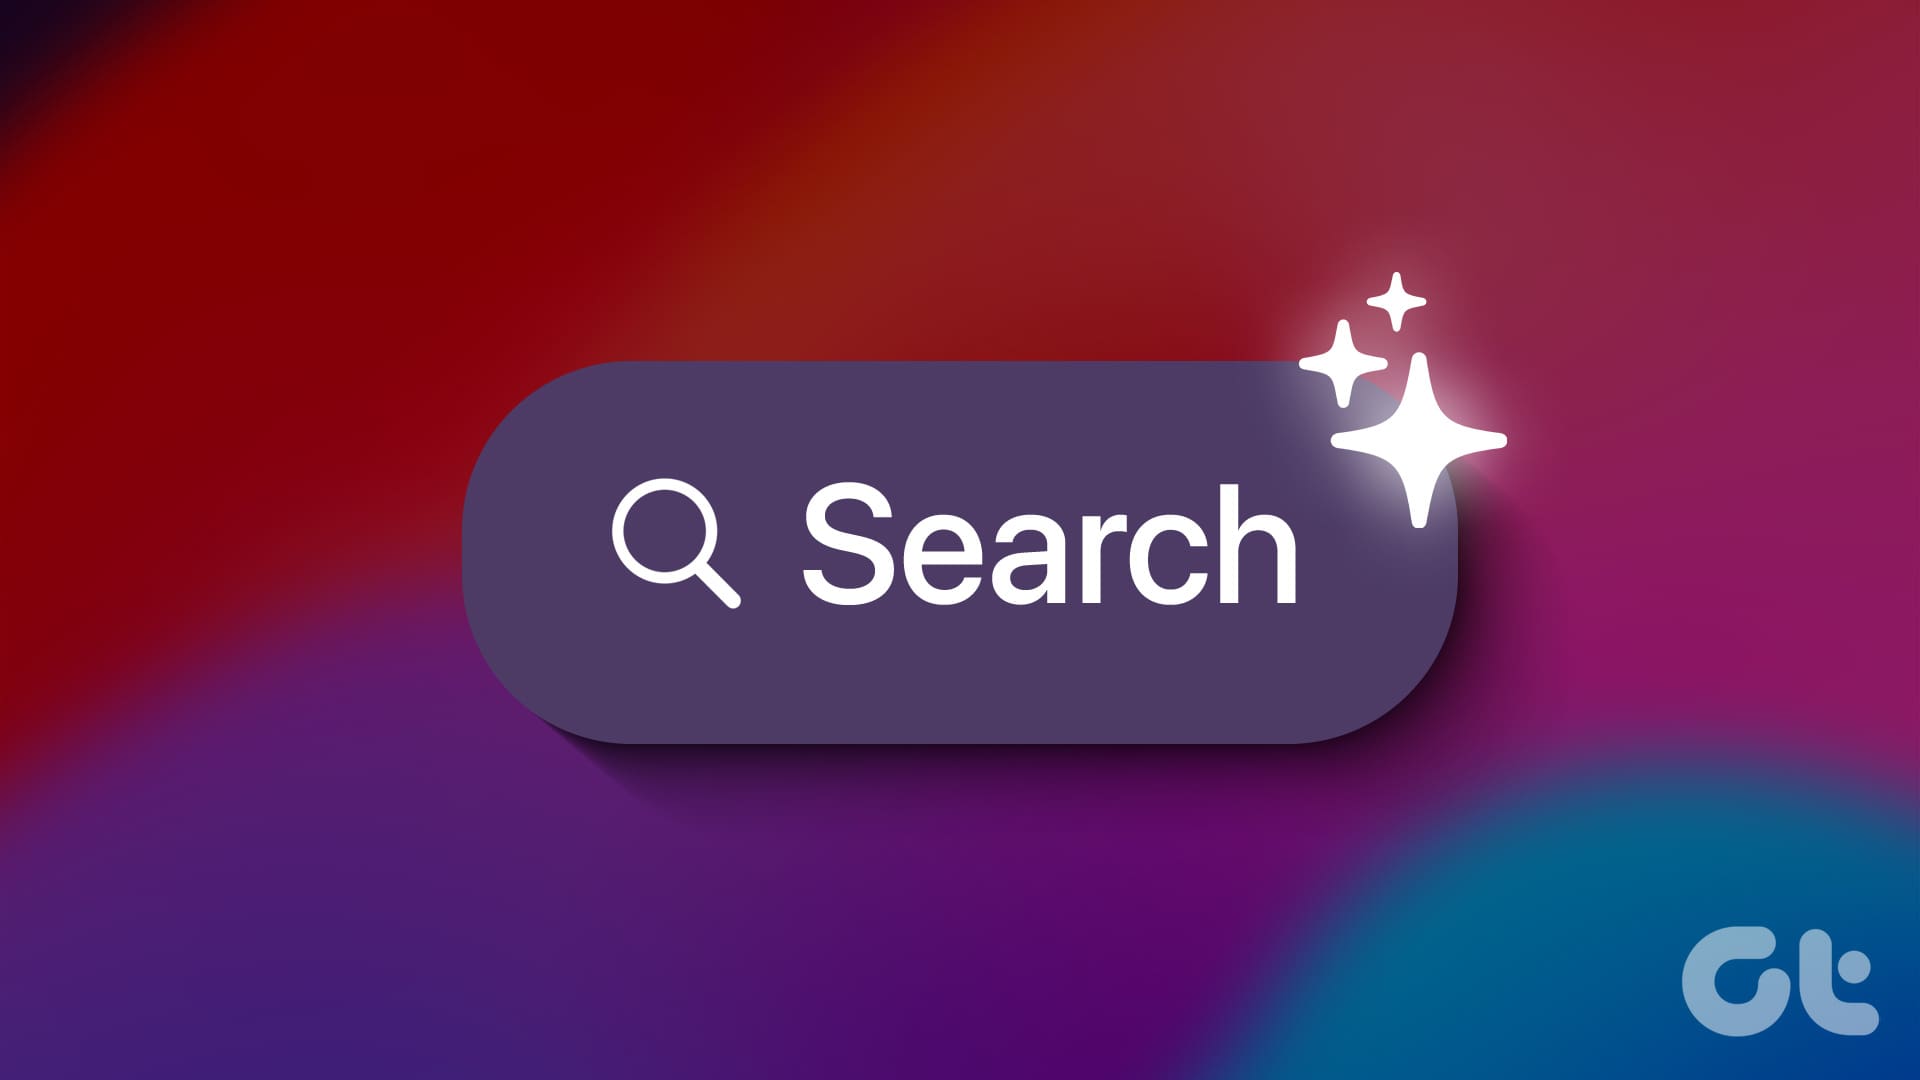 7 Best iPhone Spotlight Search Tips to Know